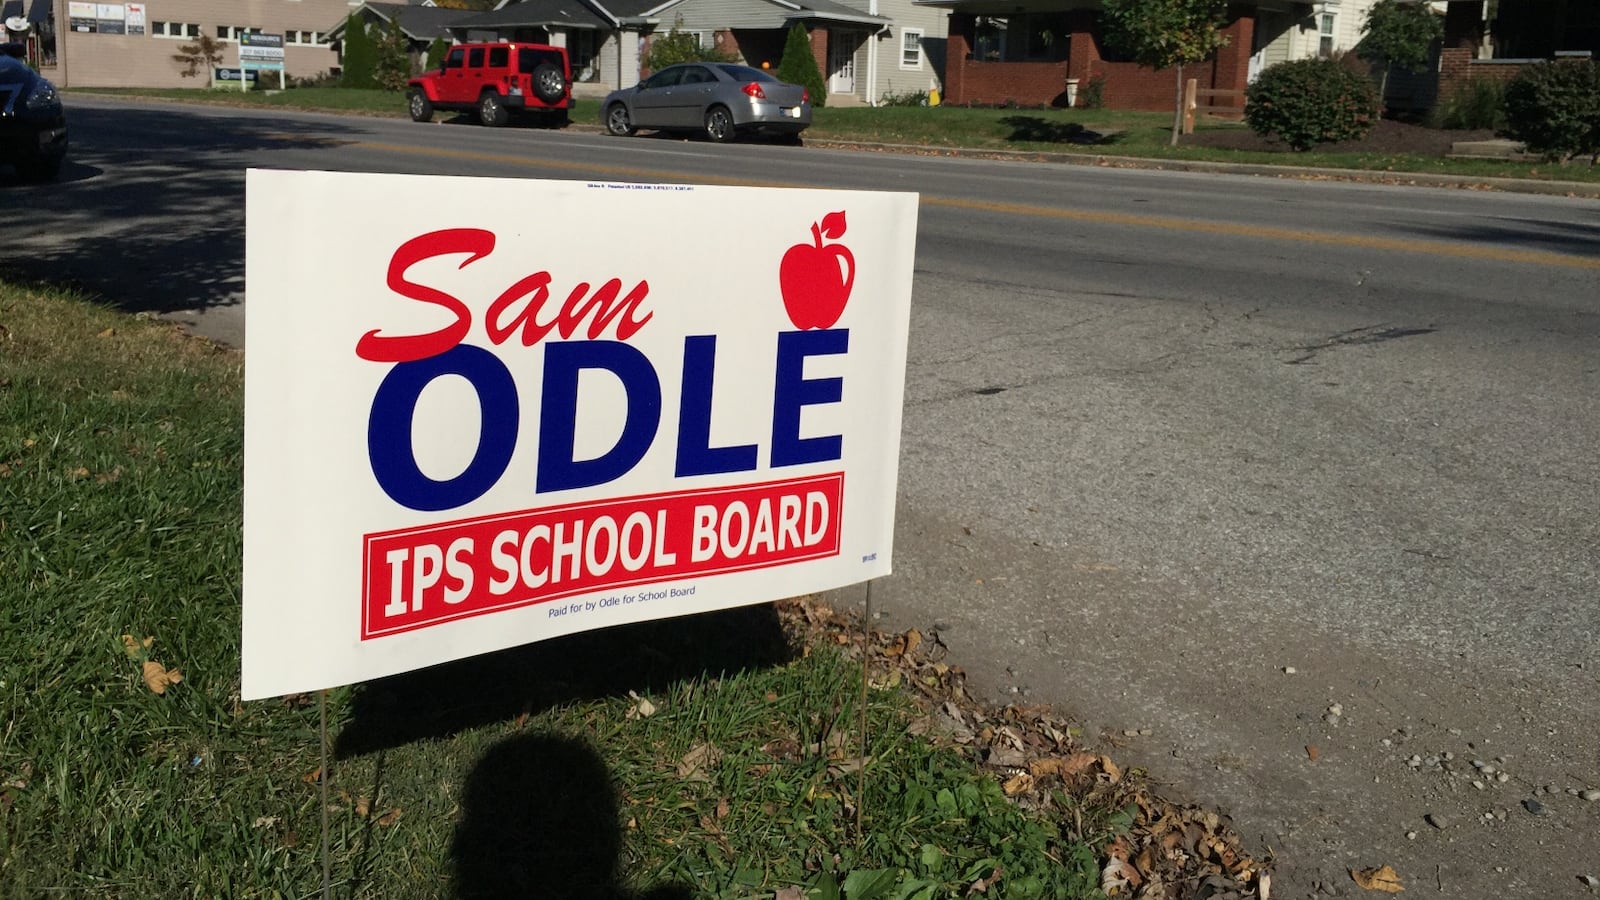 Campaign sign for the 2016 school board election.